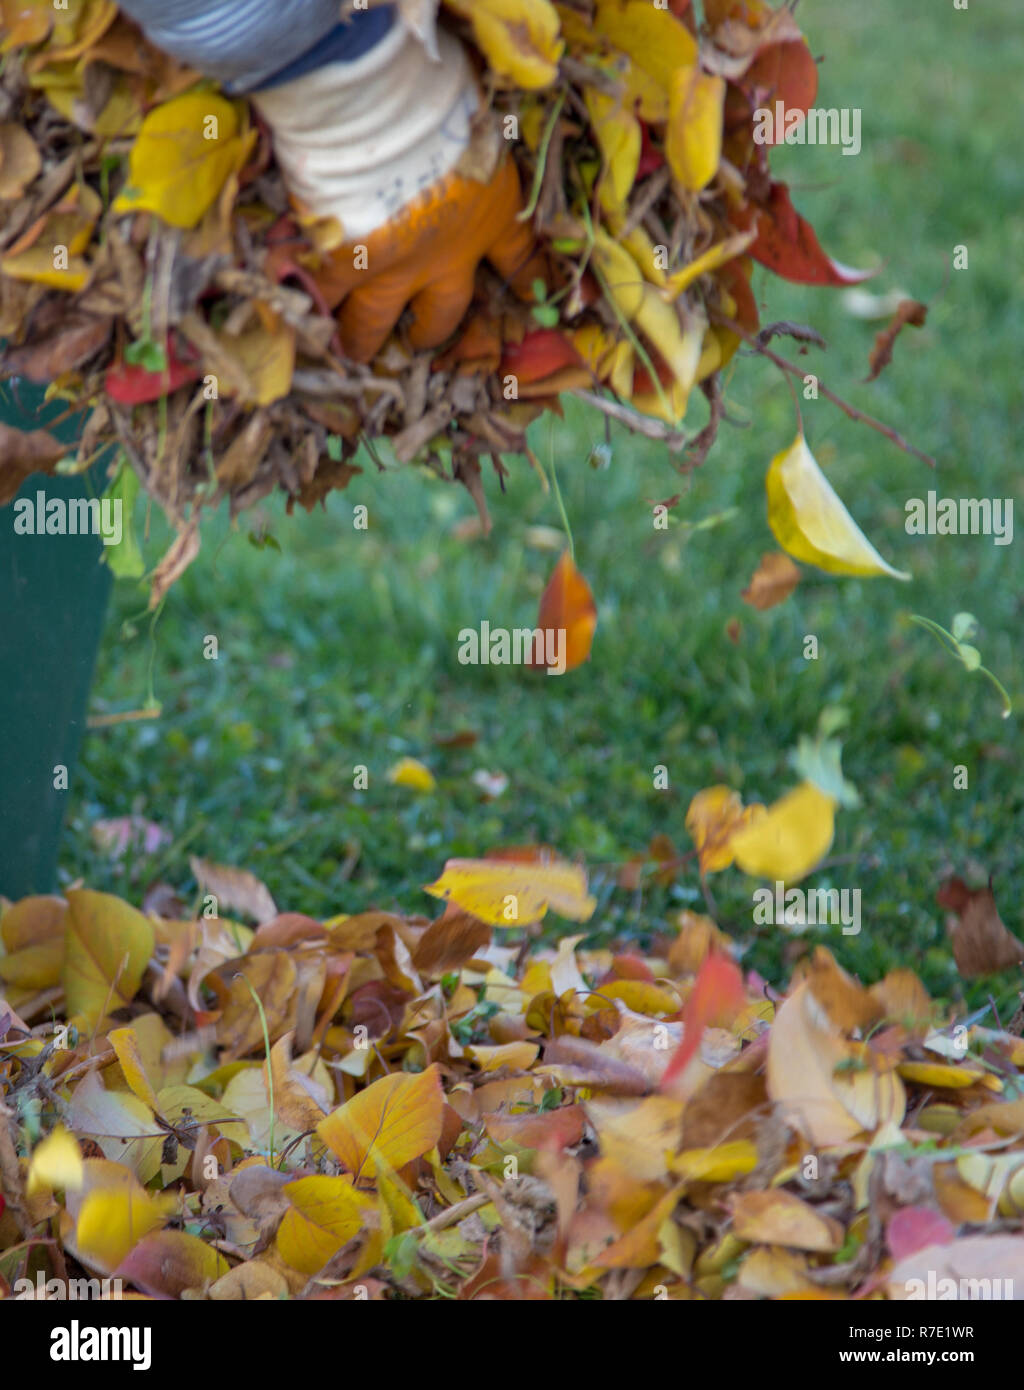 autumn, fallen leaves collecting. Stock Photo